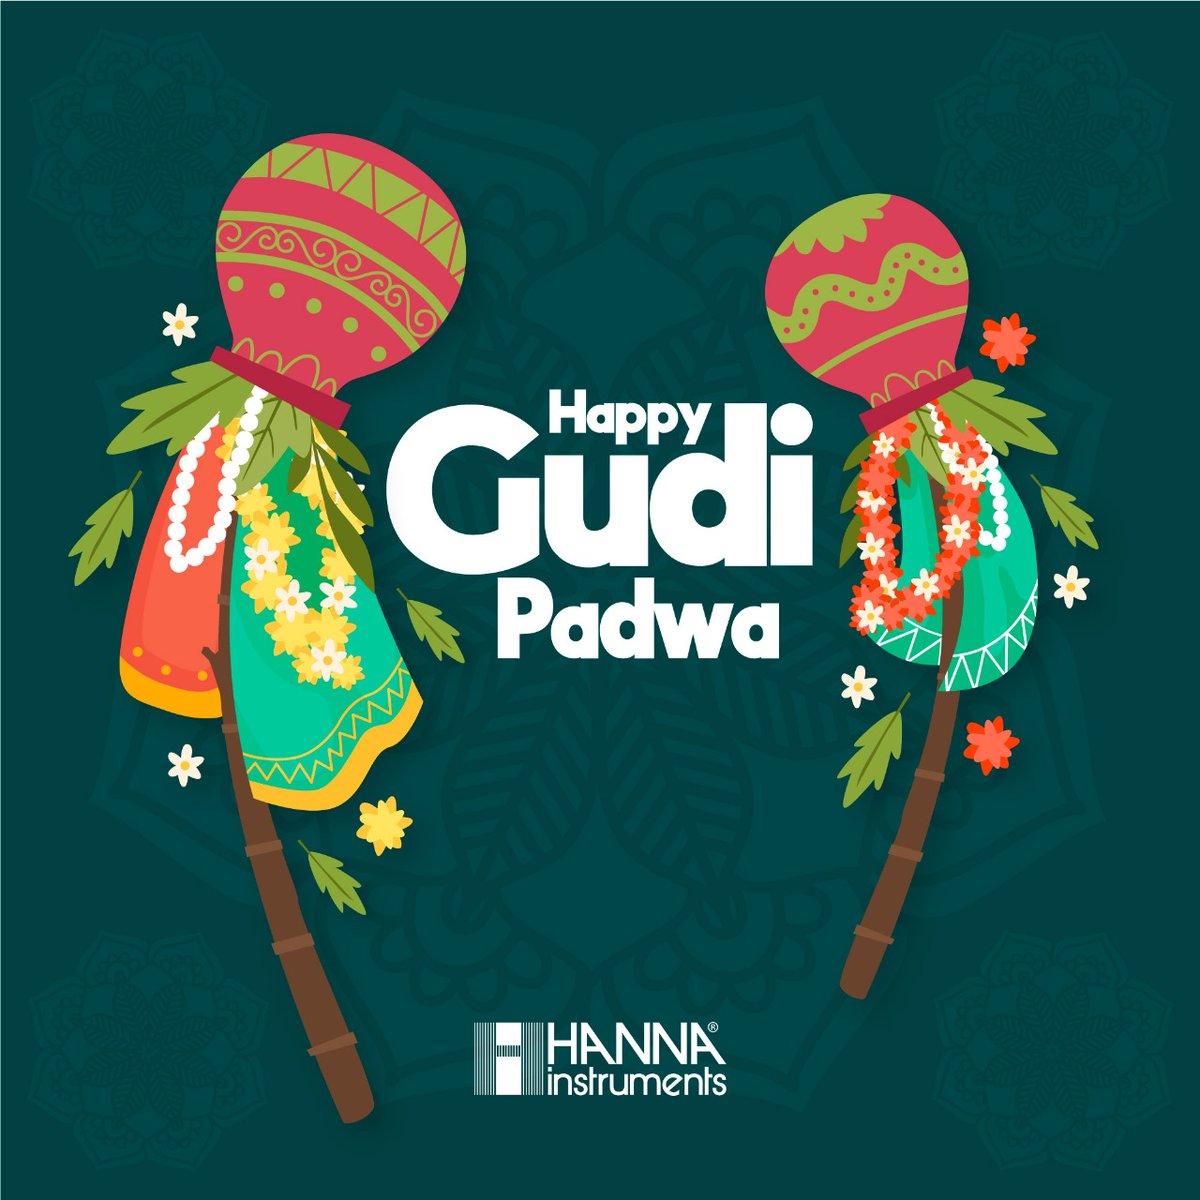 May the New Year usher in new opportunities, new beginnings, and new achievements for you and your loved ones. Wishing you a joyous Gudi Padwa from all of us at Hanna Instruments!

#HappyGudiPadwa #GudiPadwa2024 #NewYear #ShubhGudiPadwa #HannaInstruments